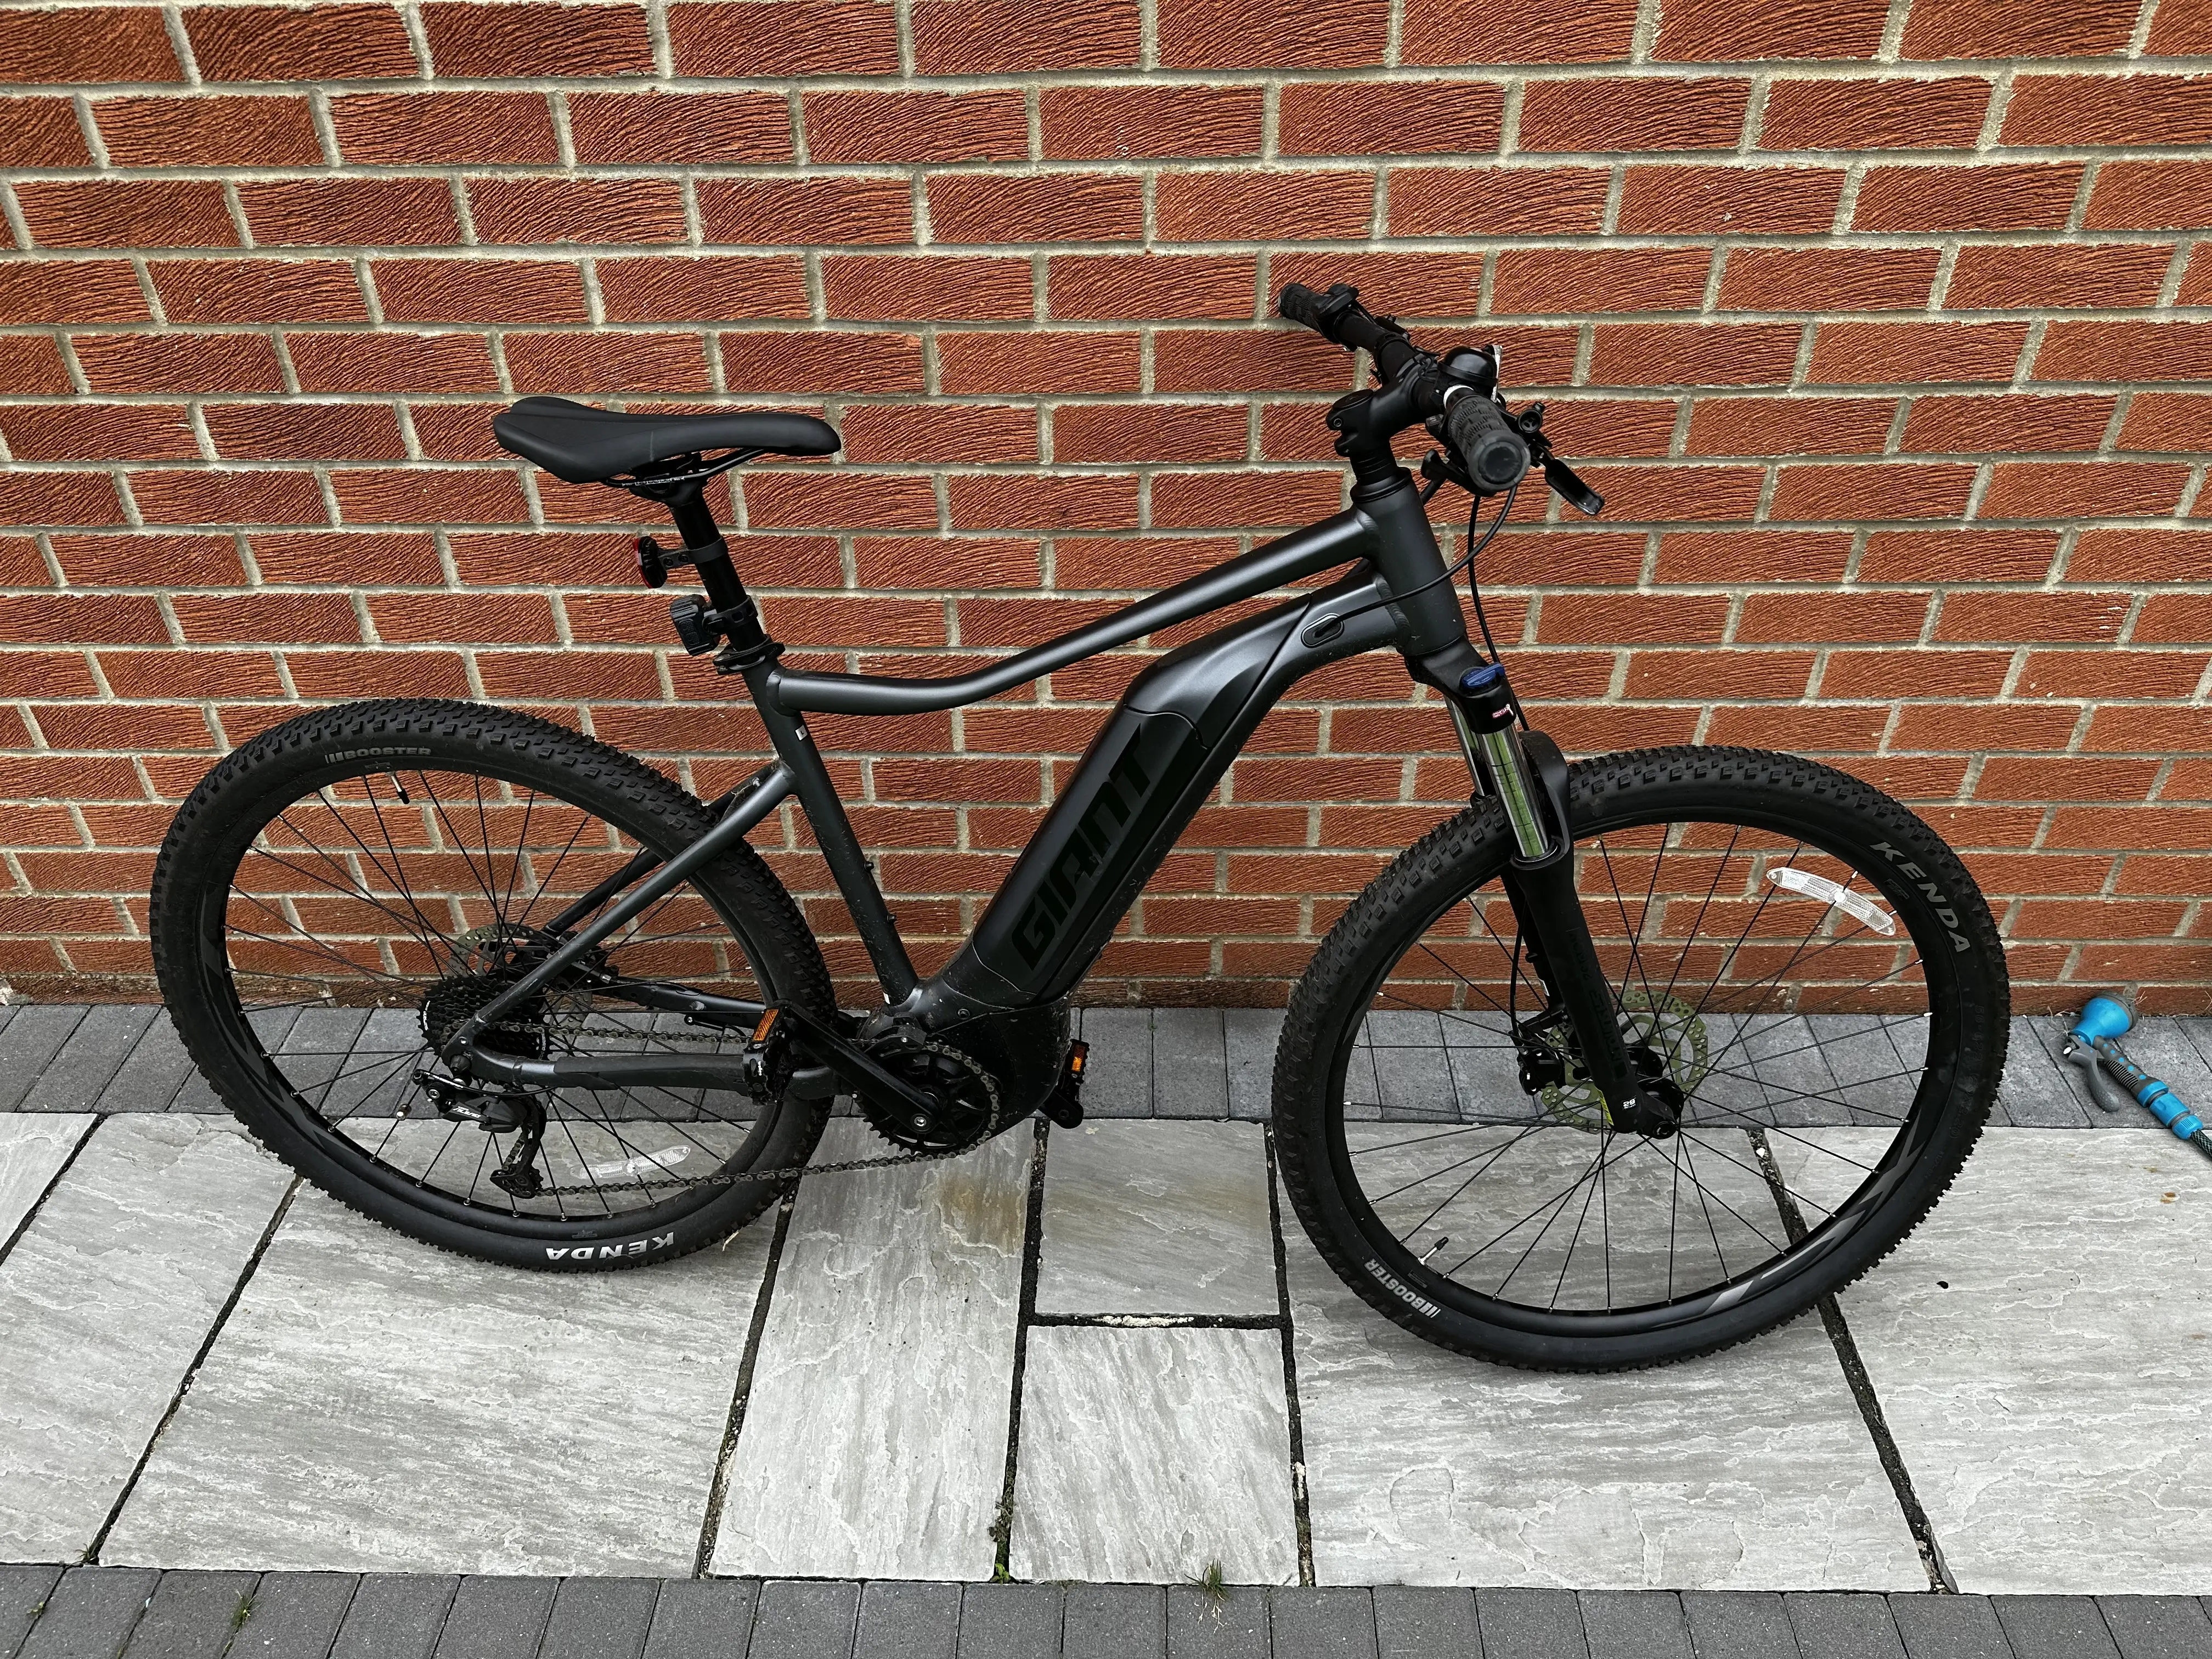 Giant Talon E+ 29 Sport used in LG buycycle